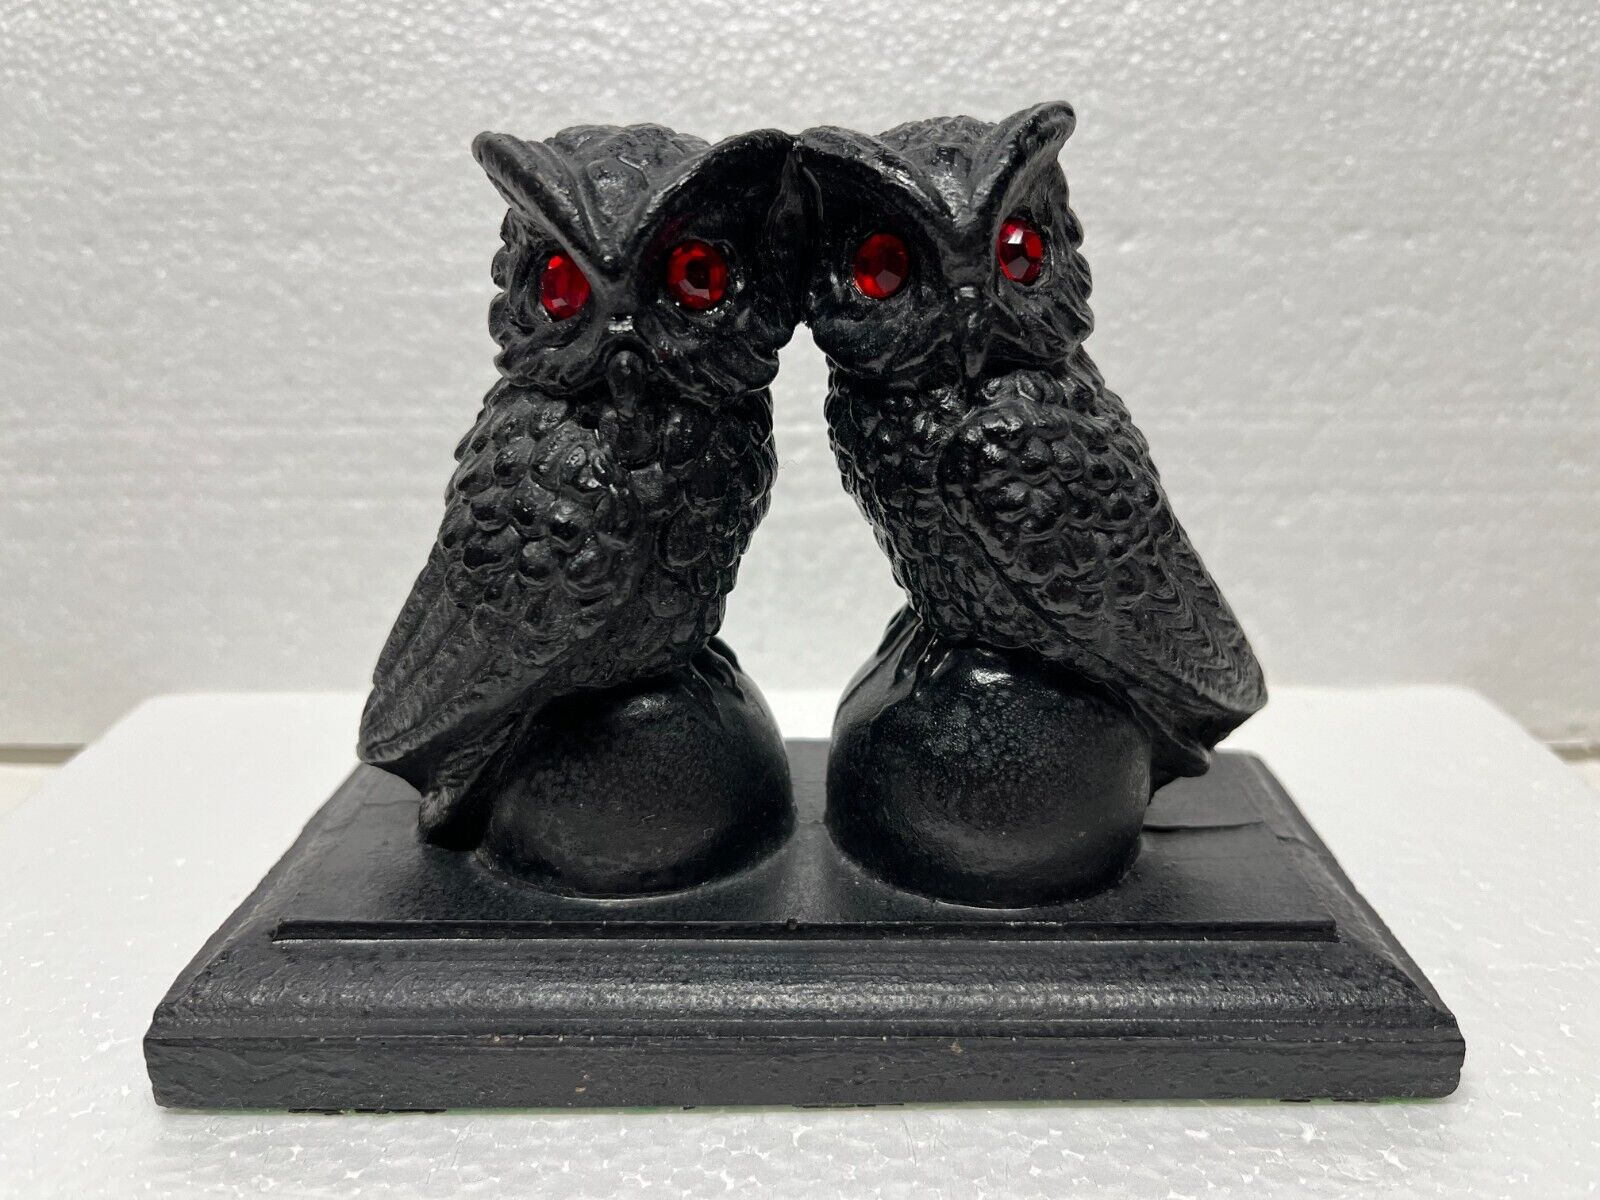 A Pair of Owls with Red Rhinestone Eyes Hand Crafted from Coal - Vintage